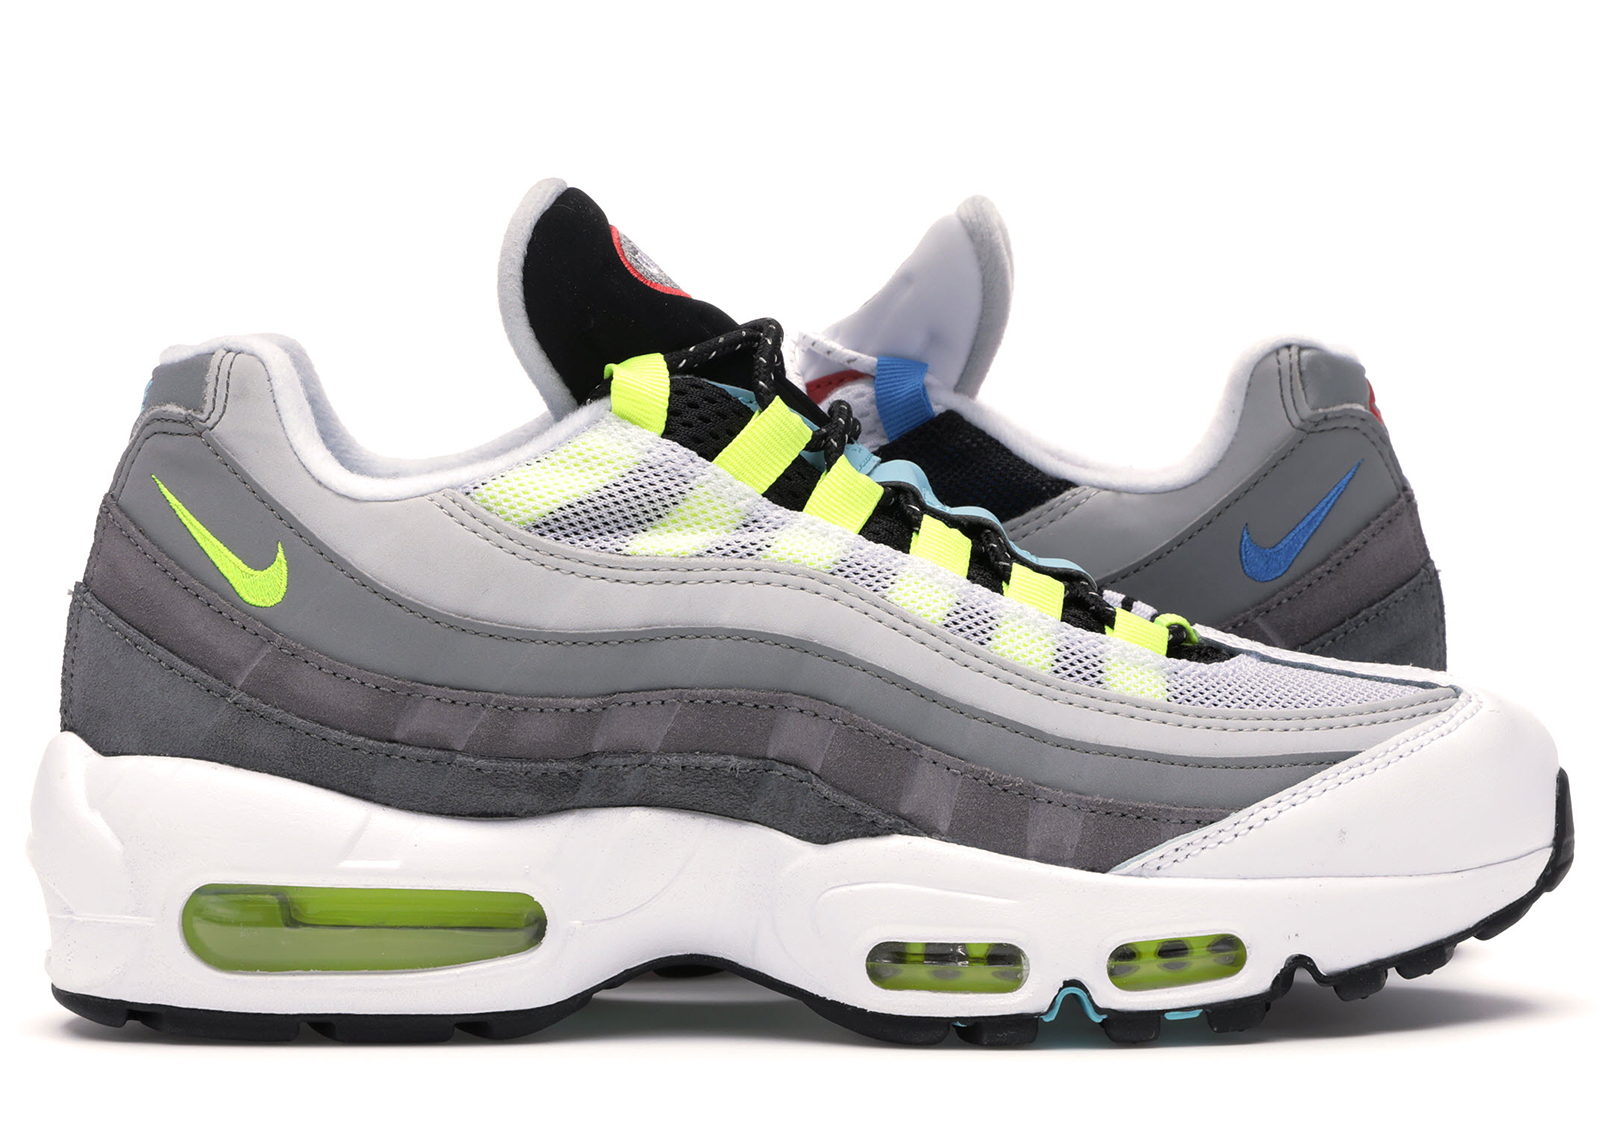 Buy Nike Air Max 95 Size 14 Shoes & Deadstock Sneakers